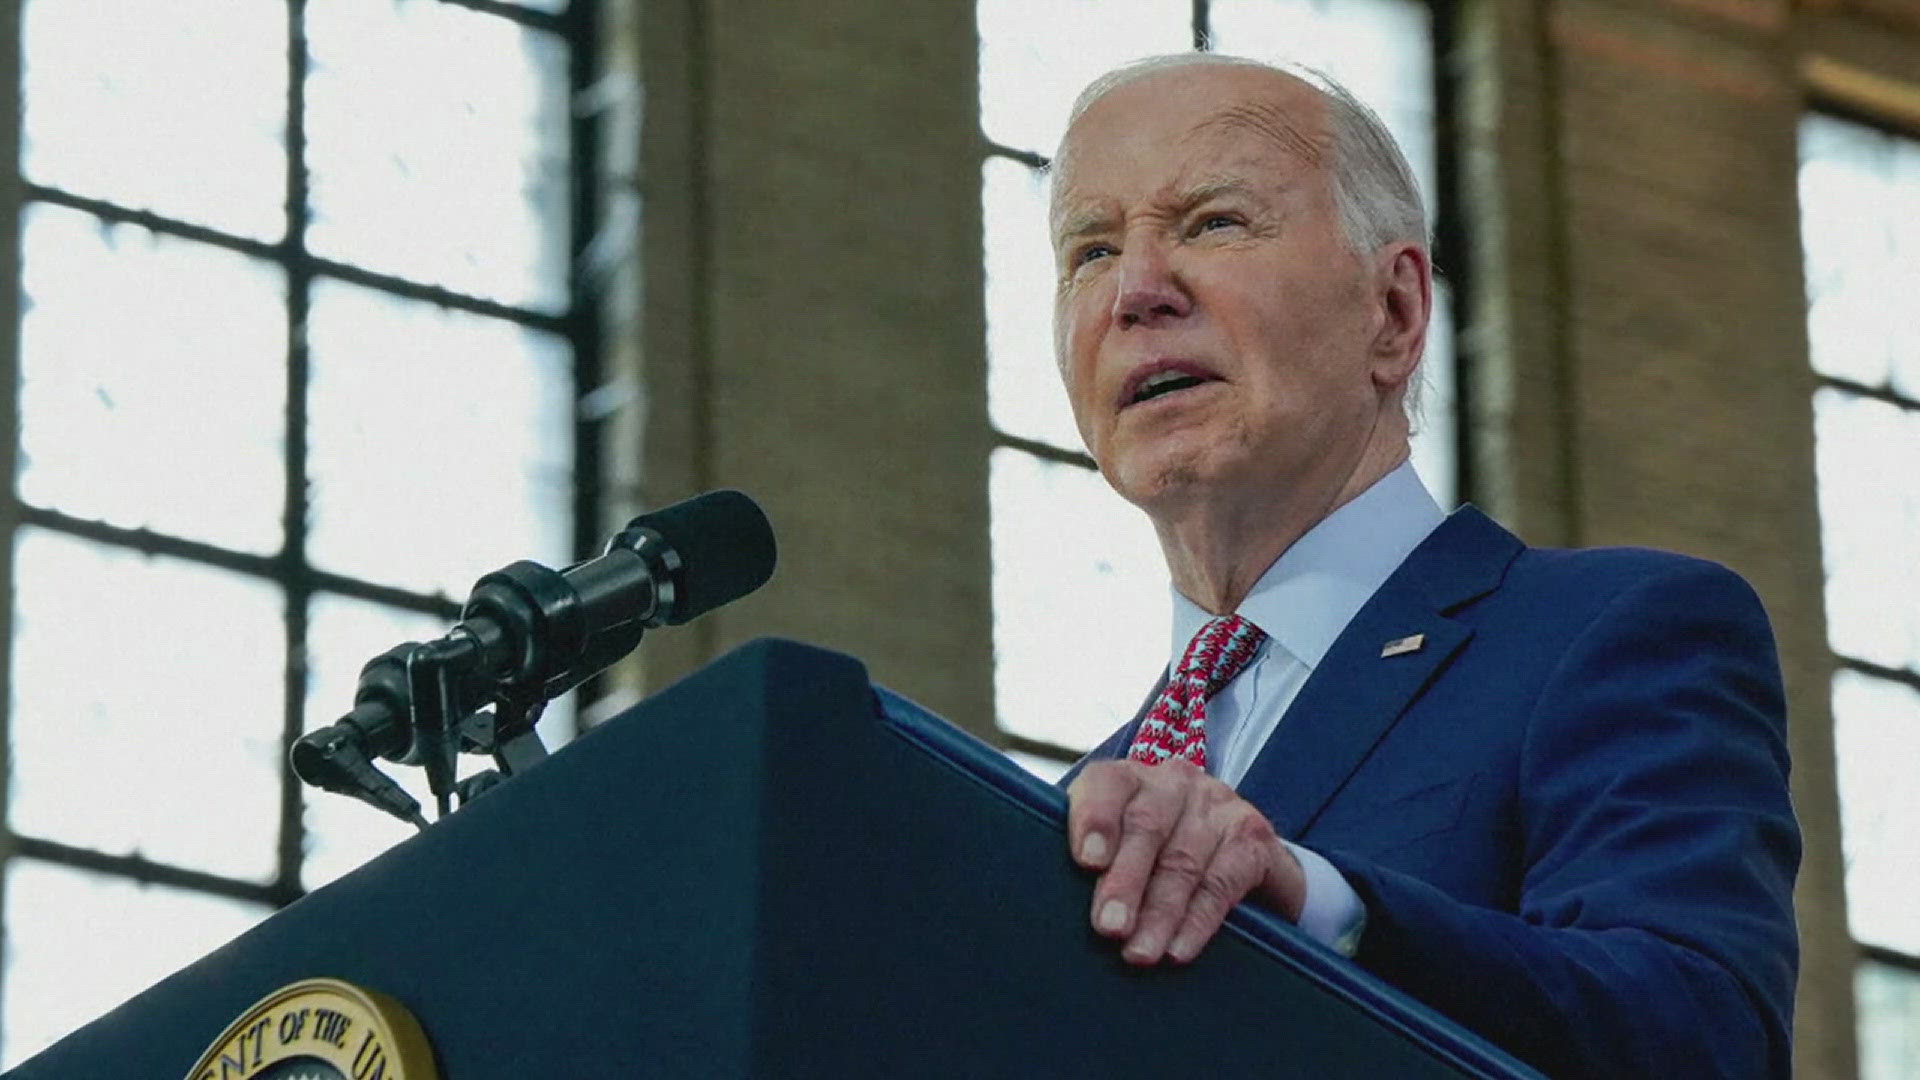 Following the first presidential debate, Joe Biden has been working to regroup. Meanwhile, Donald Trump has been capitalizing on the momentum of the debate.